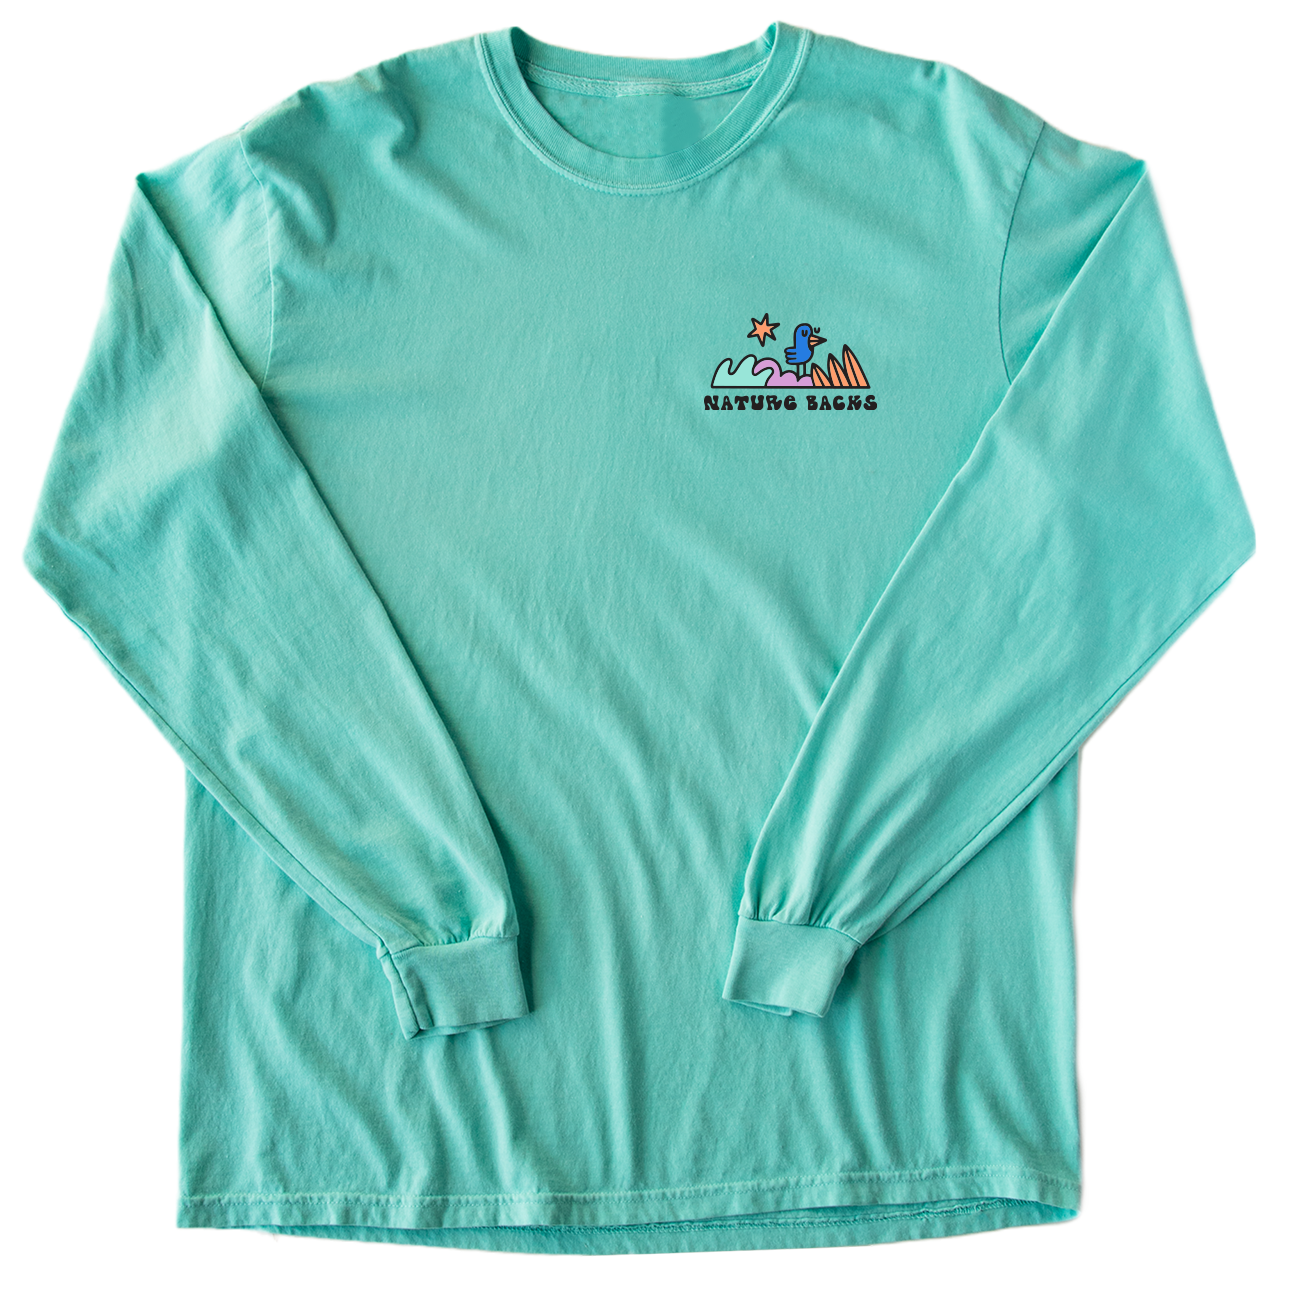 Nature Backs Limited Edition Long Sleeve 100% Organic Cotton T-Shirt | Limited Dreamer Chalky Mint Long Sleeve made with Eco-Friendly Fibers Sustainably made in the USA 